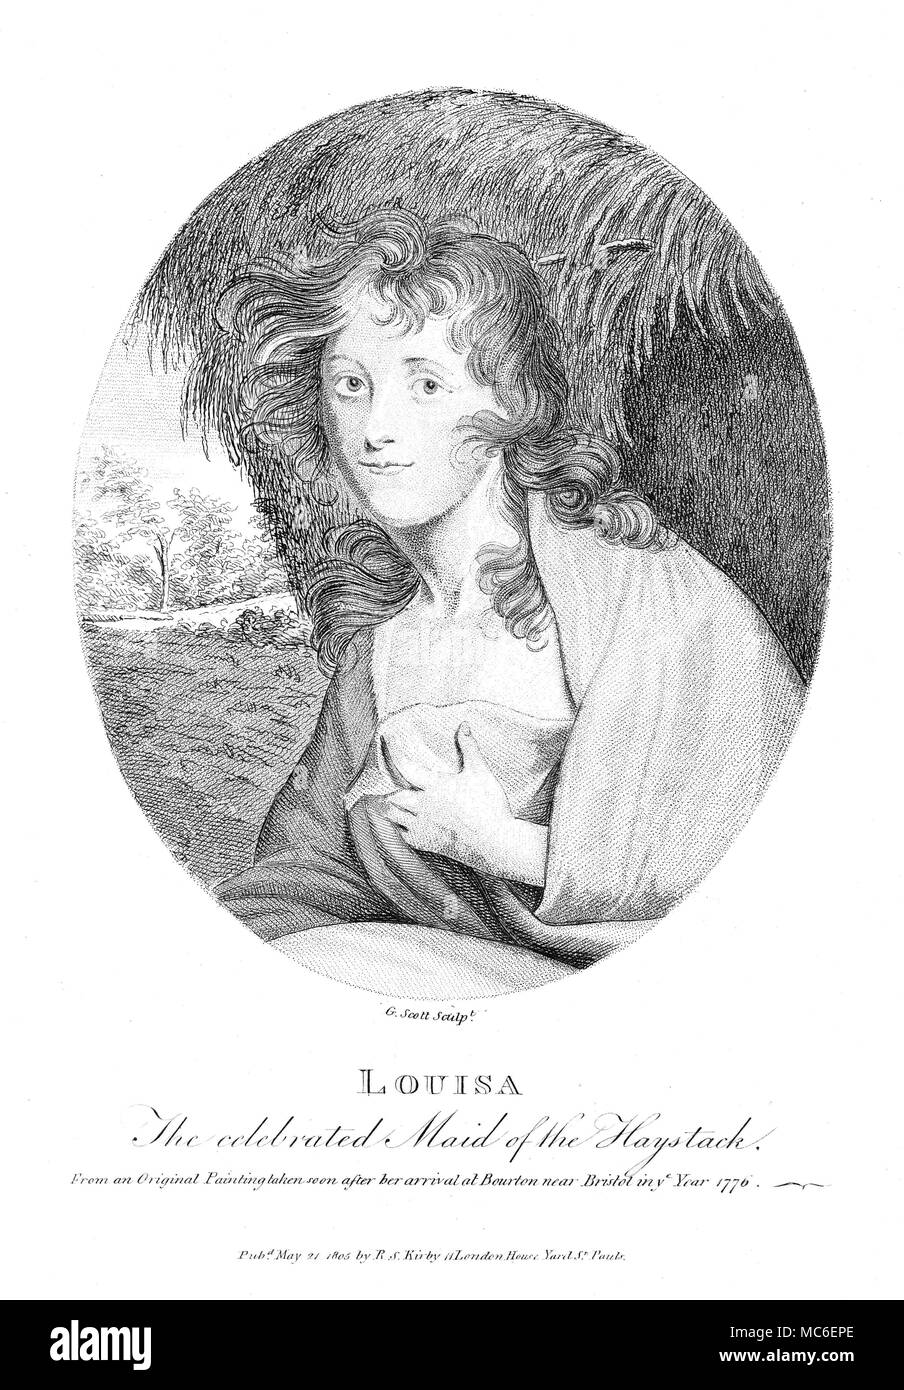 STRANGE PHENOMENA - MAID OF THE HAYSTACK Portrait of Louisa, 'the celebrated Maid of the Haystack' - from an original painting executed after her arrival at Bourton, near Bristol, in 1776. Engraving of 1805 by R.S. Kirby. Engraving used in Kirby's Wonderful and Eccentric Museum; or, Magazine of Remarkable Characters, 1820. Stock Photo